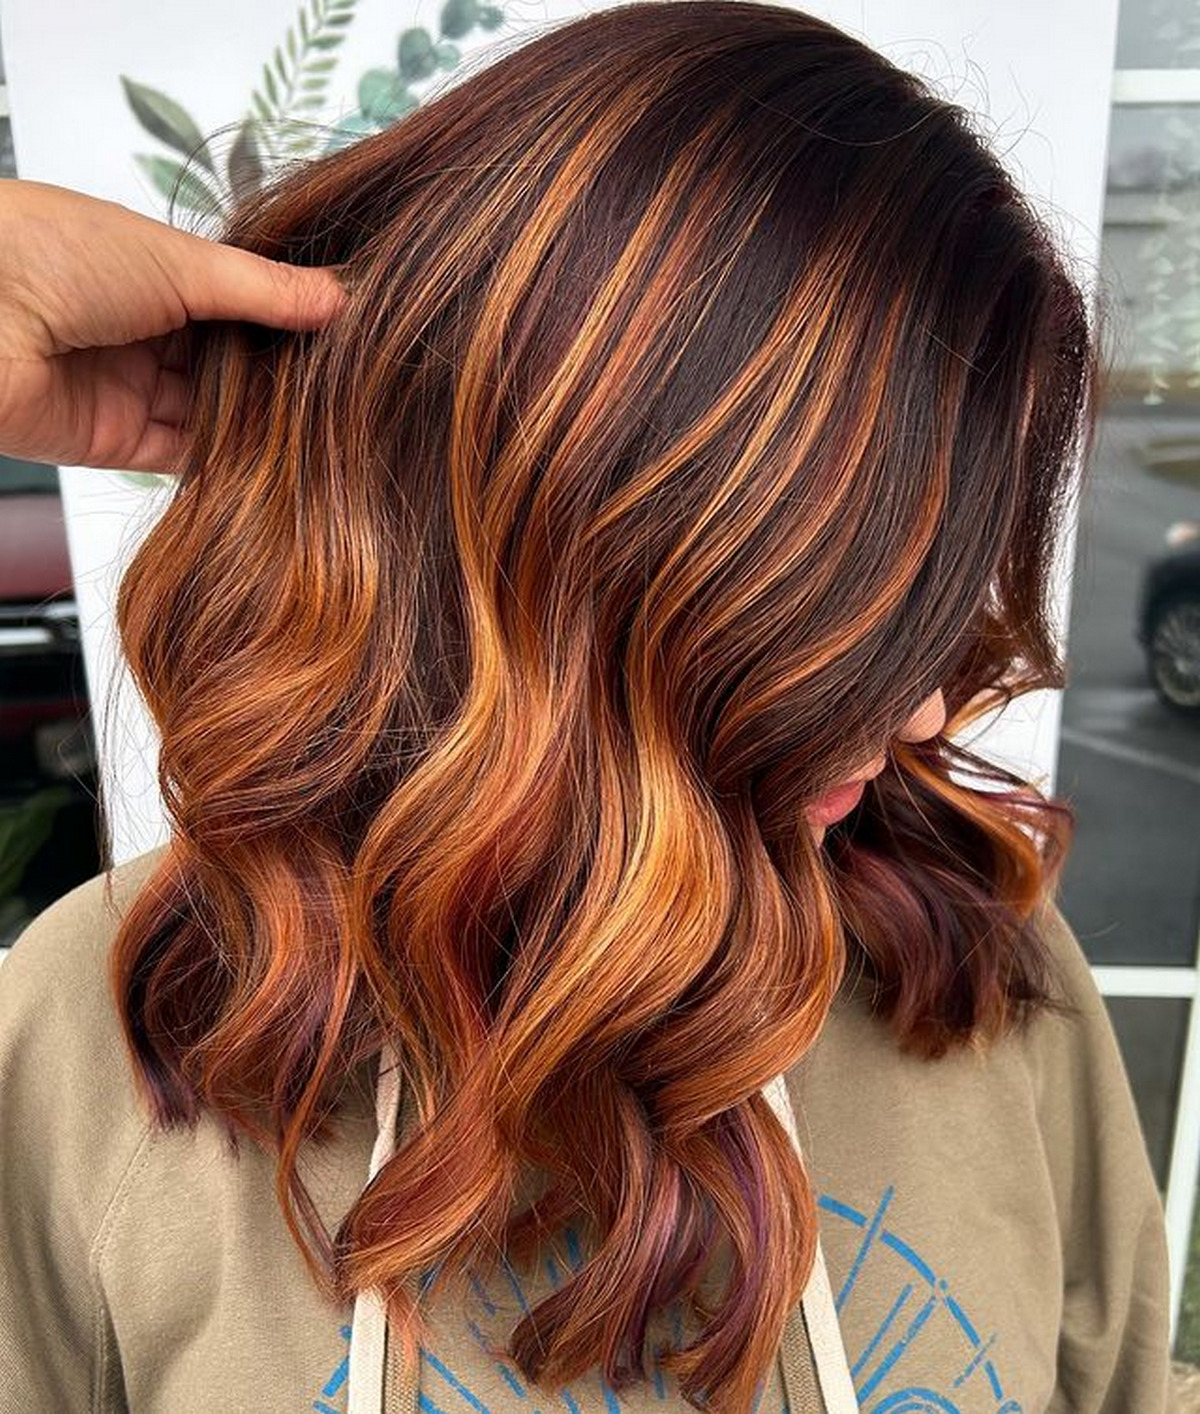 Flaming Locks With Ginger Strips